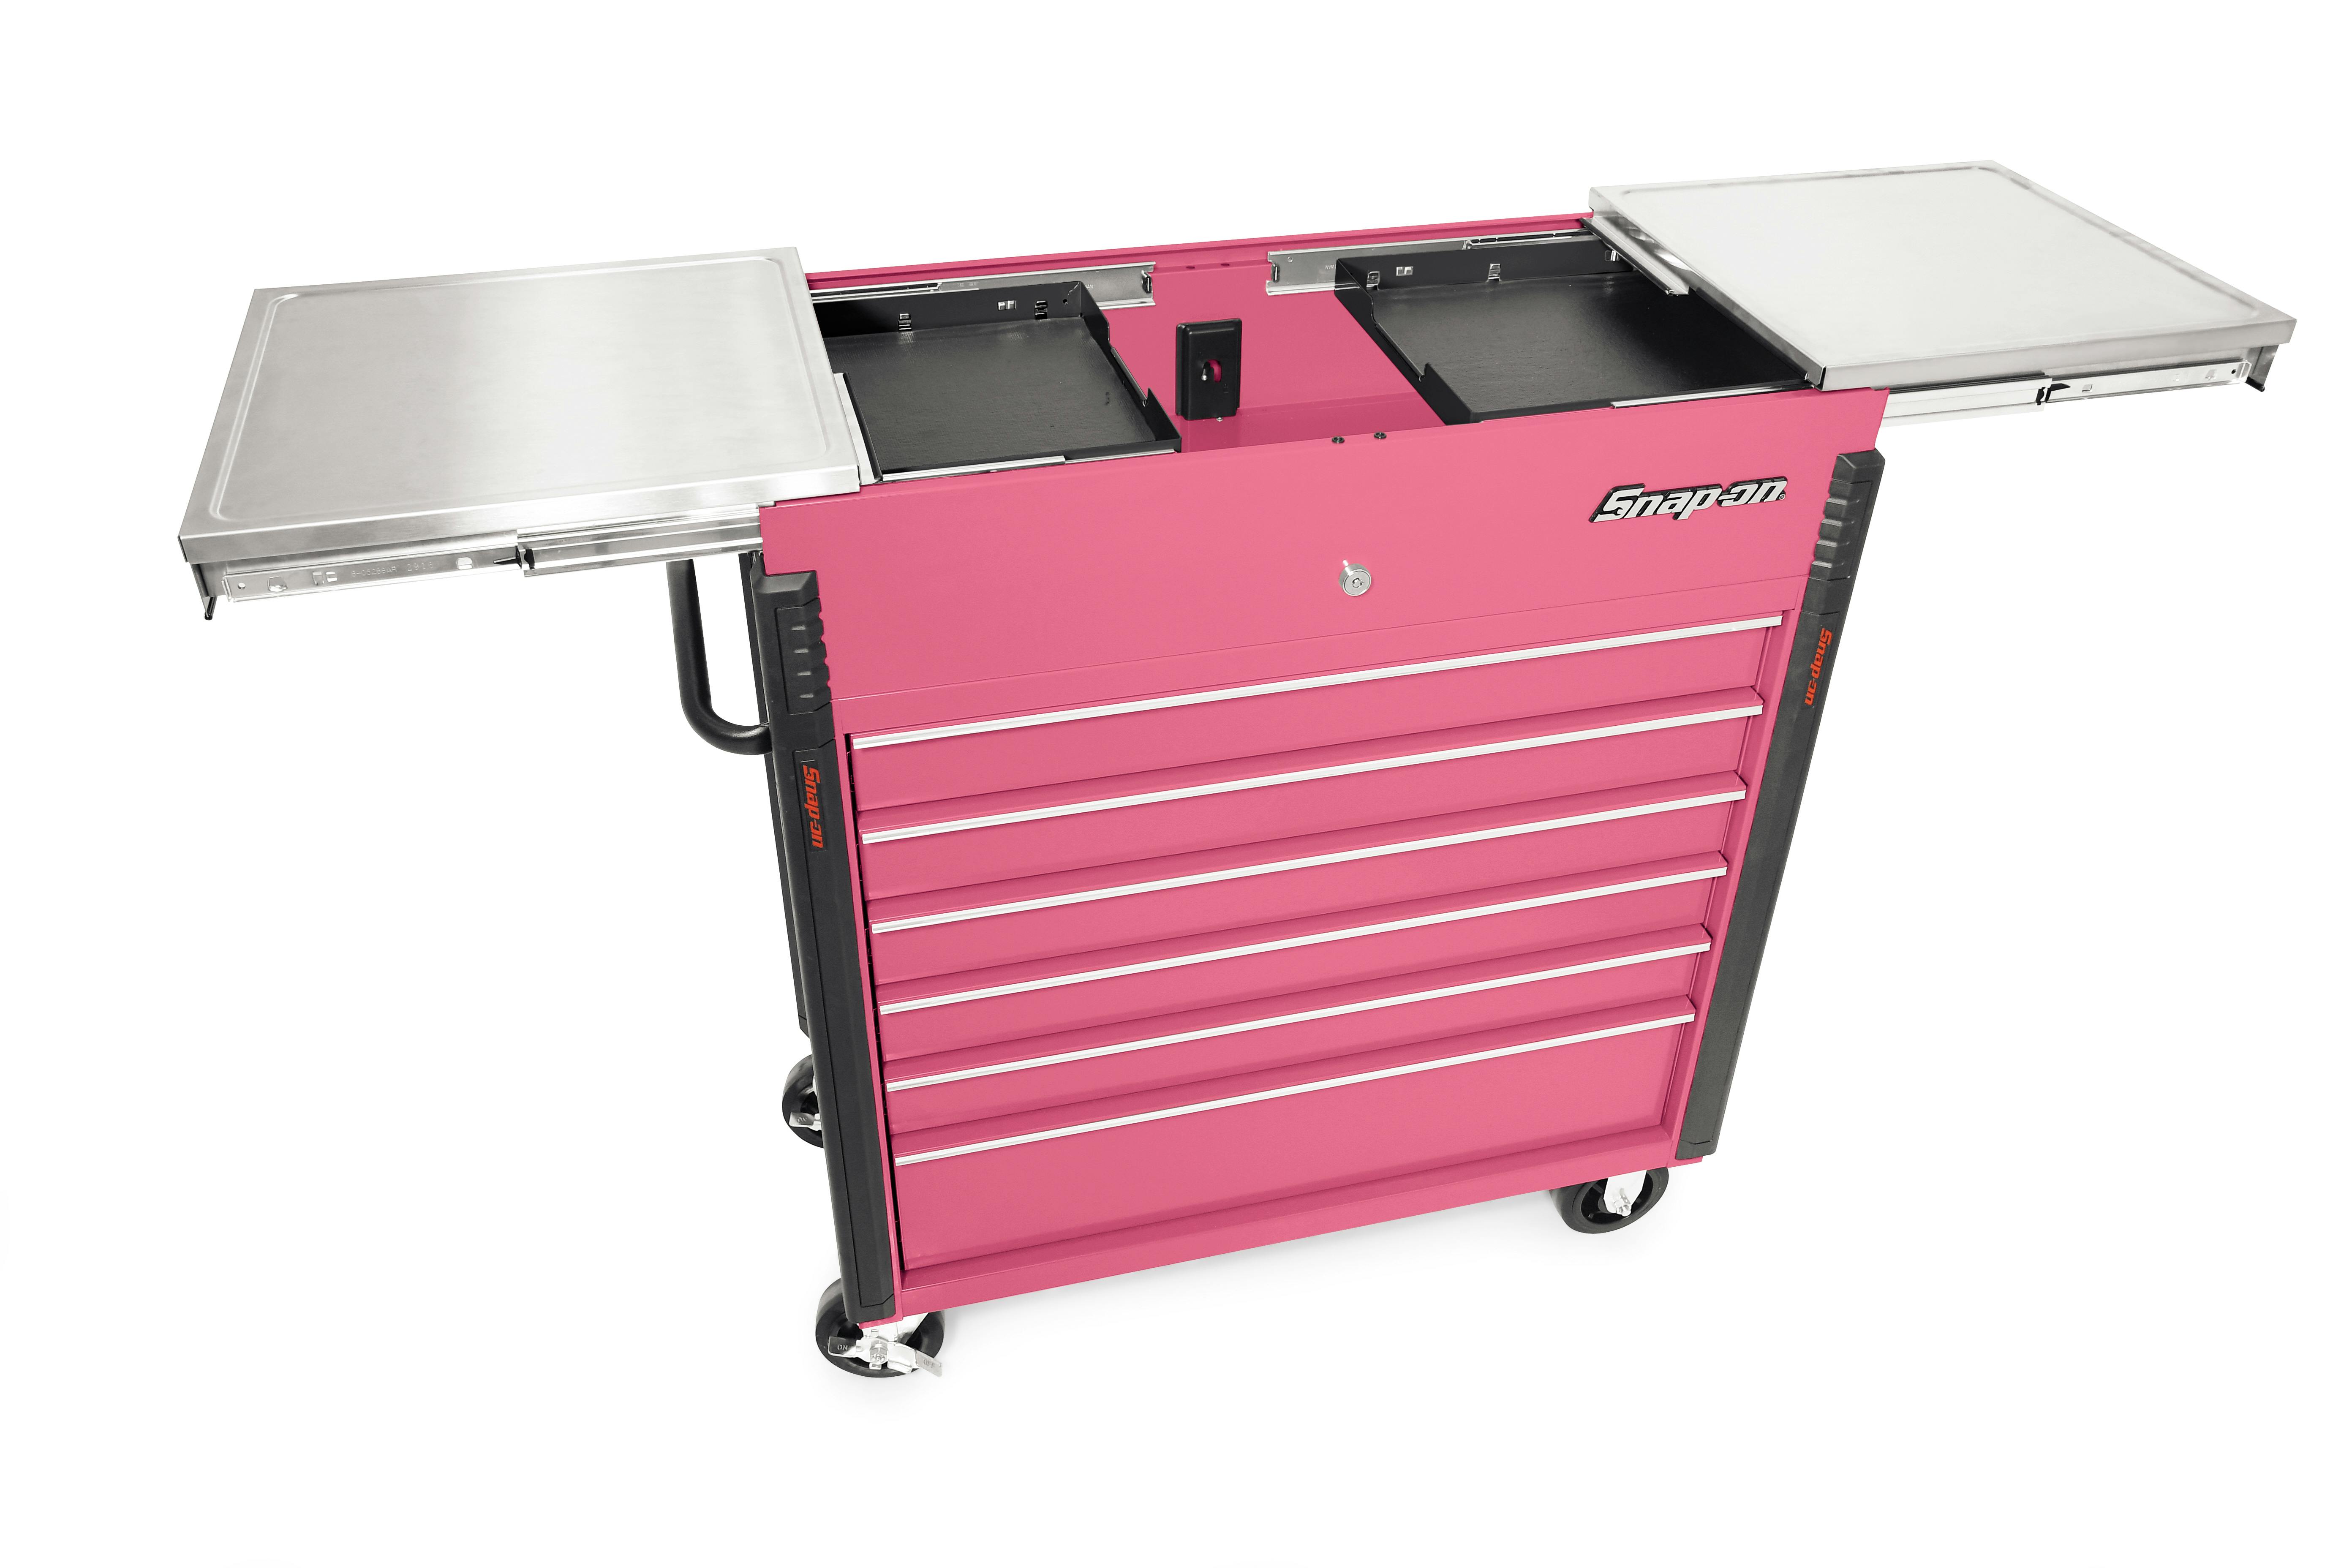 40 Sliding Lid Eight-Drawer Stainless Lid Shop Cart (Electric Orange), Snap On Krsc430 For Sale